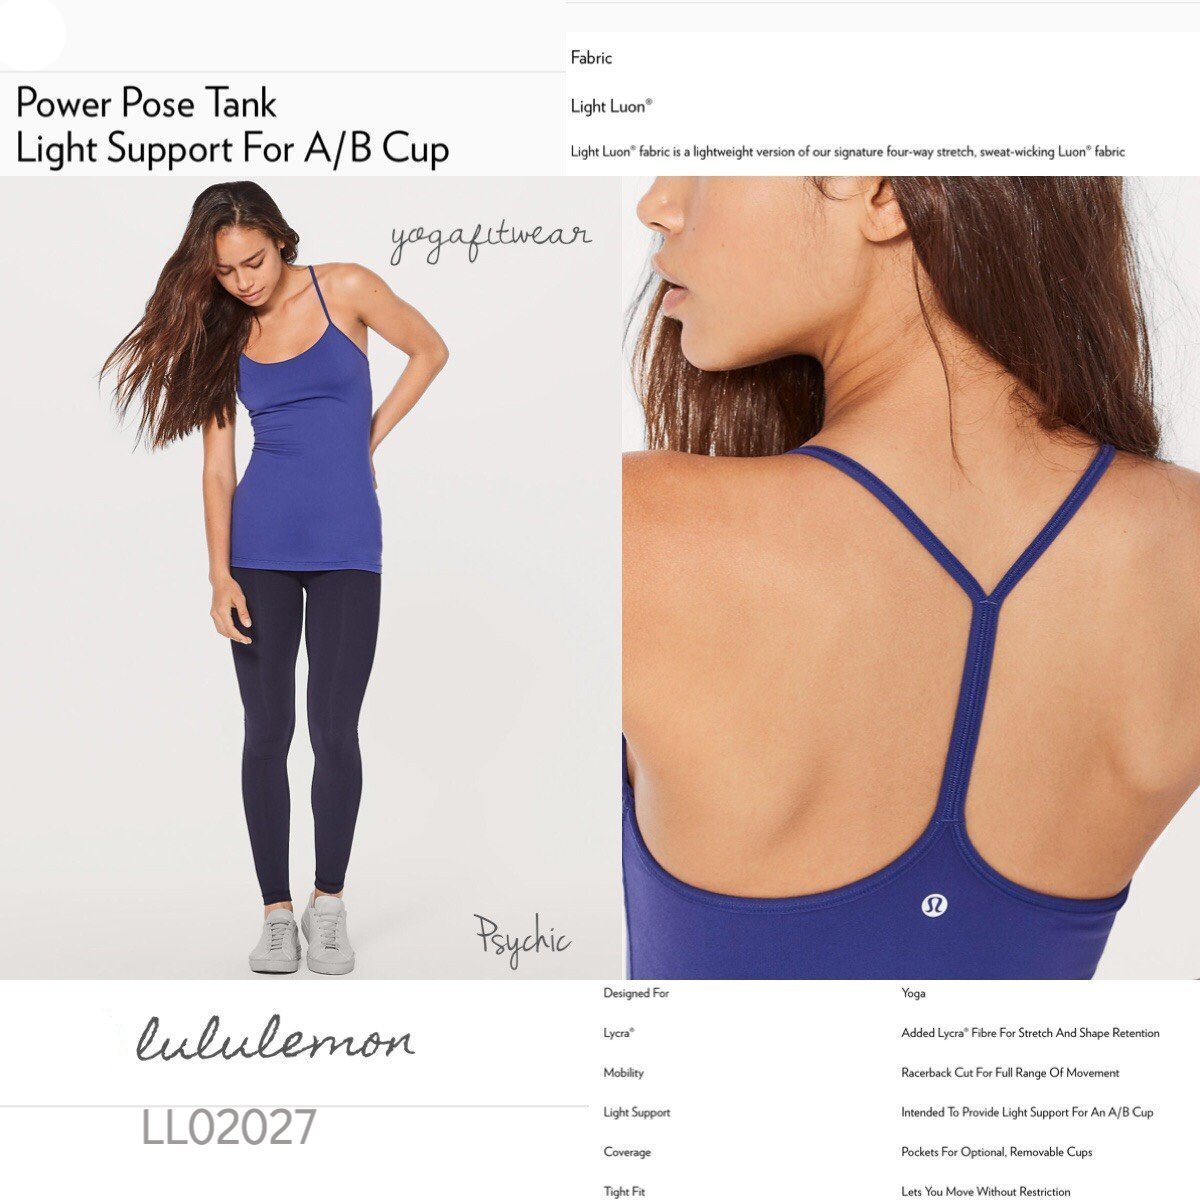 Lululemon -  Power Pose Tank(USA) Light Support For A/B Cup (Psychic) (LL02027)